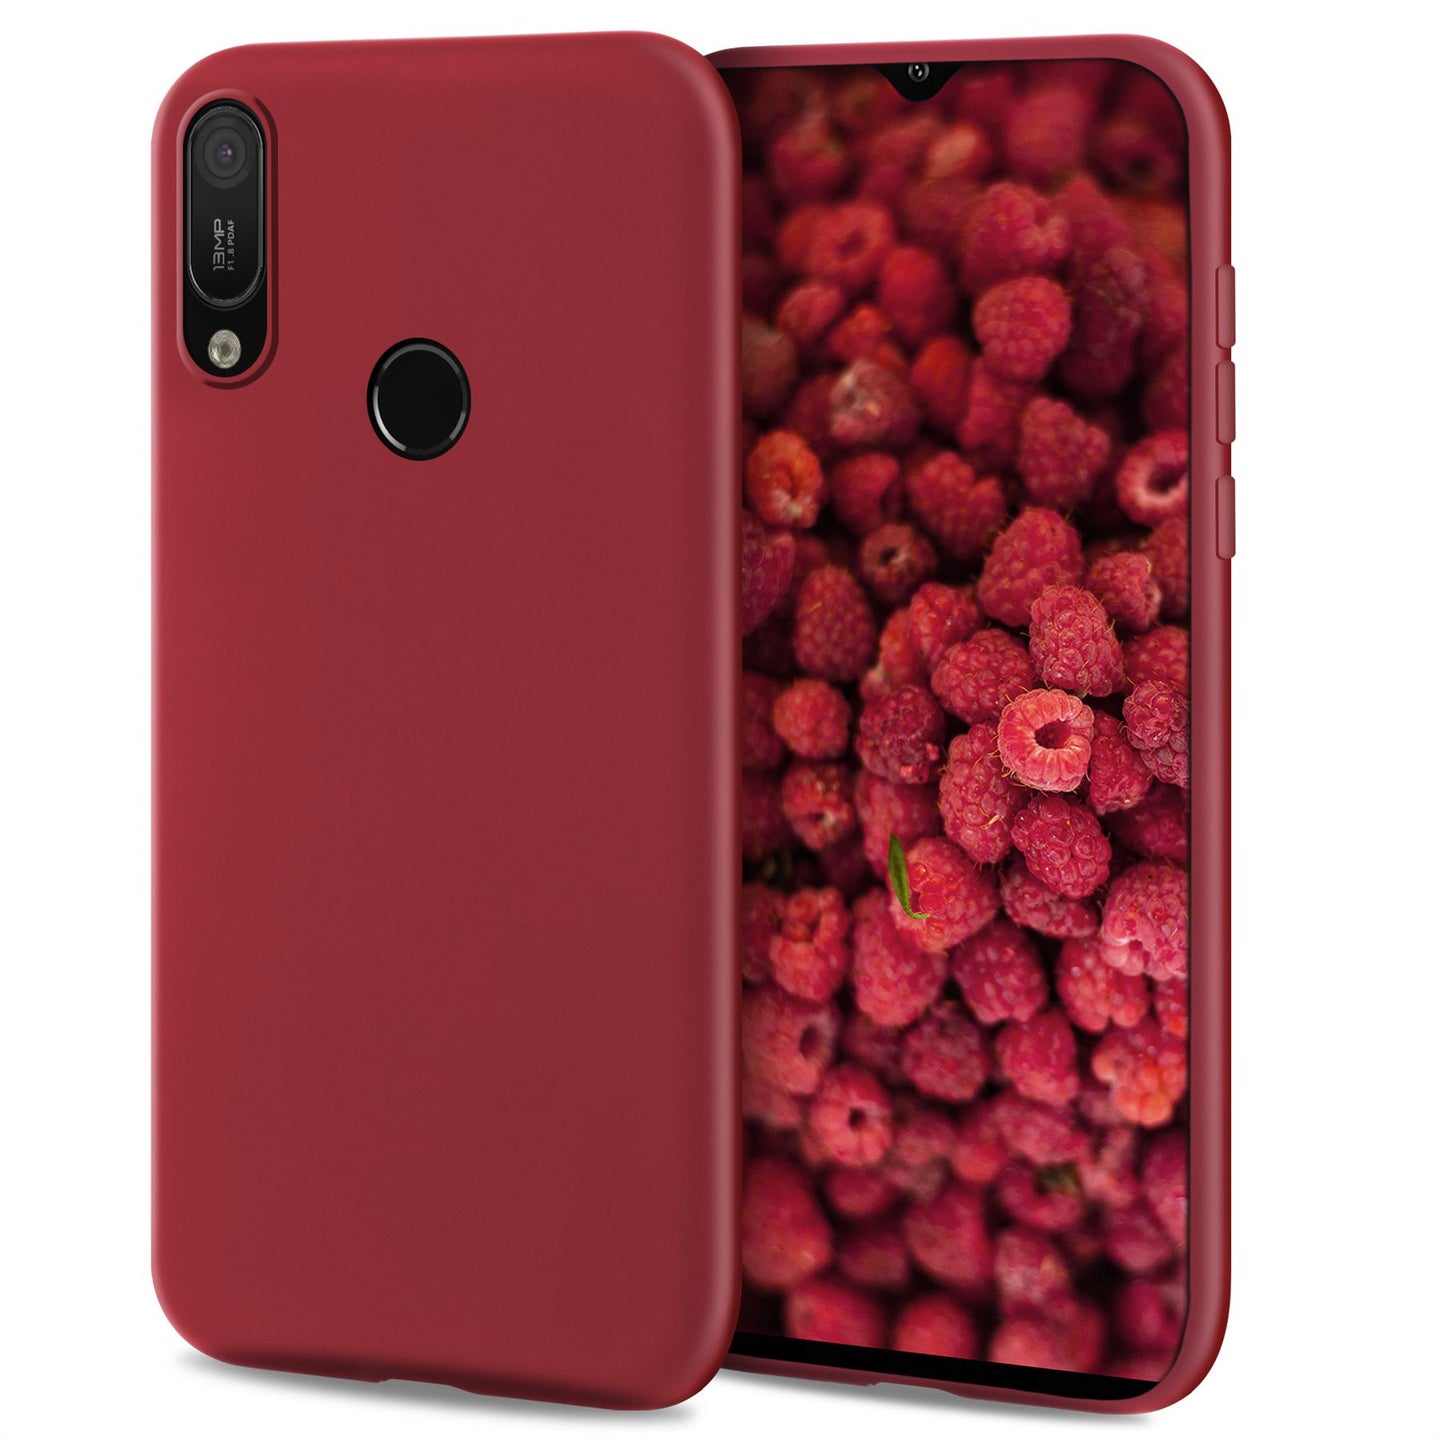 Moozy Lifestyle. Designed for Huawei Y6 2019 Case, Vintage Pink - Liquid Silicone Cover with Matte Finish and Soft Microfiber Lining